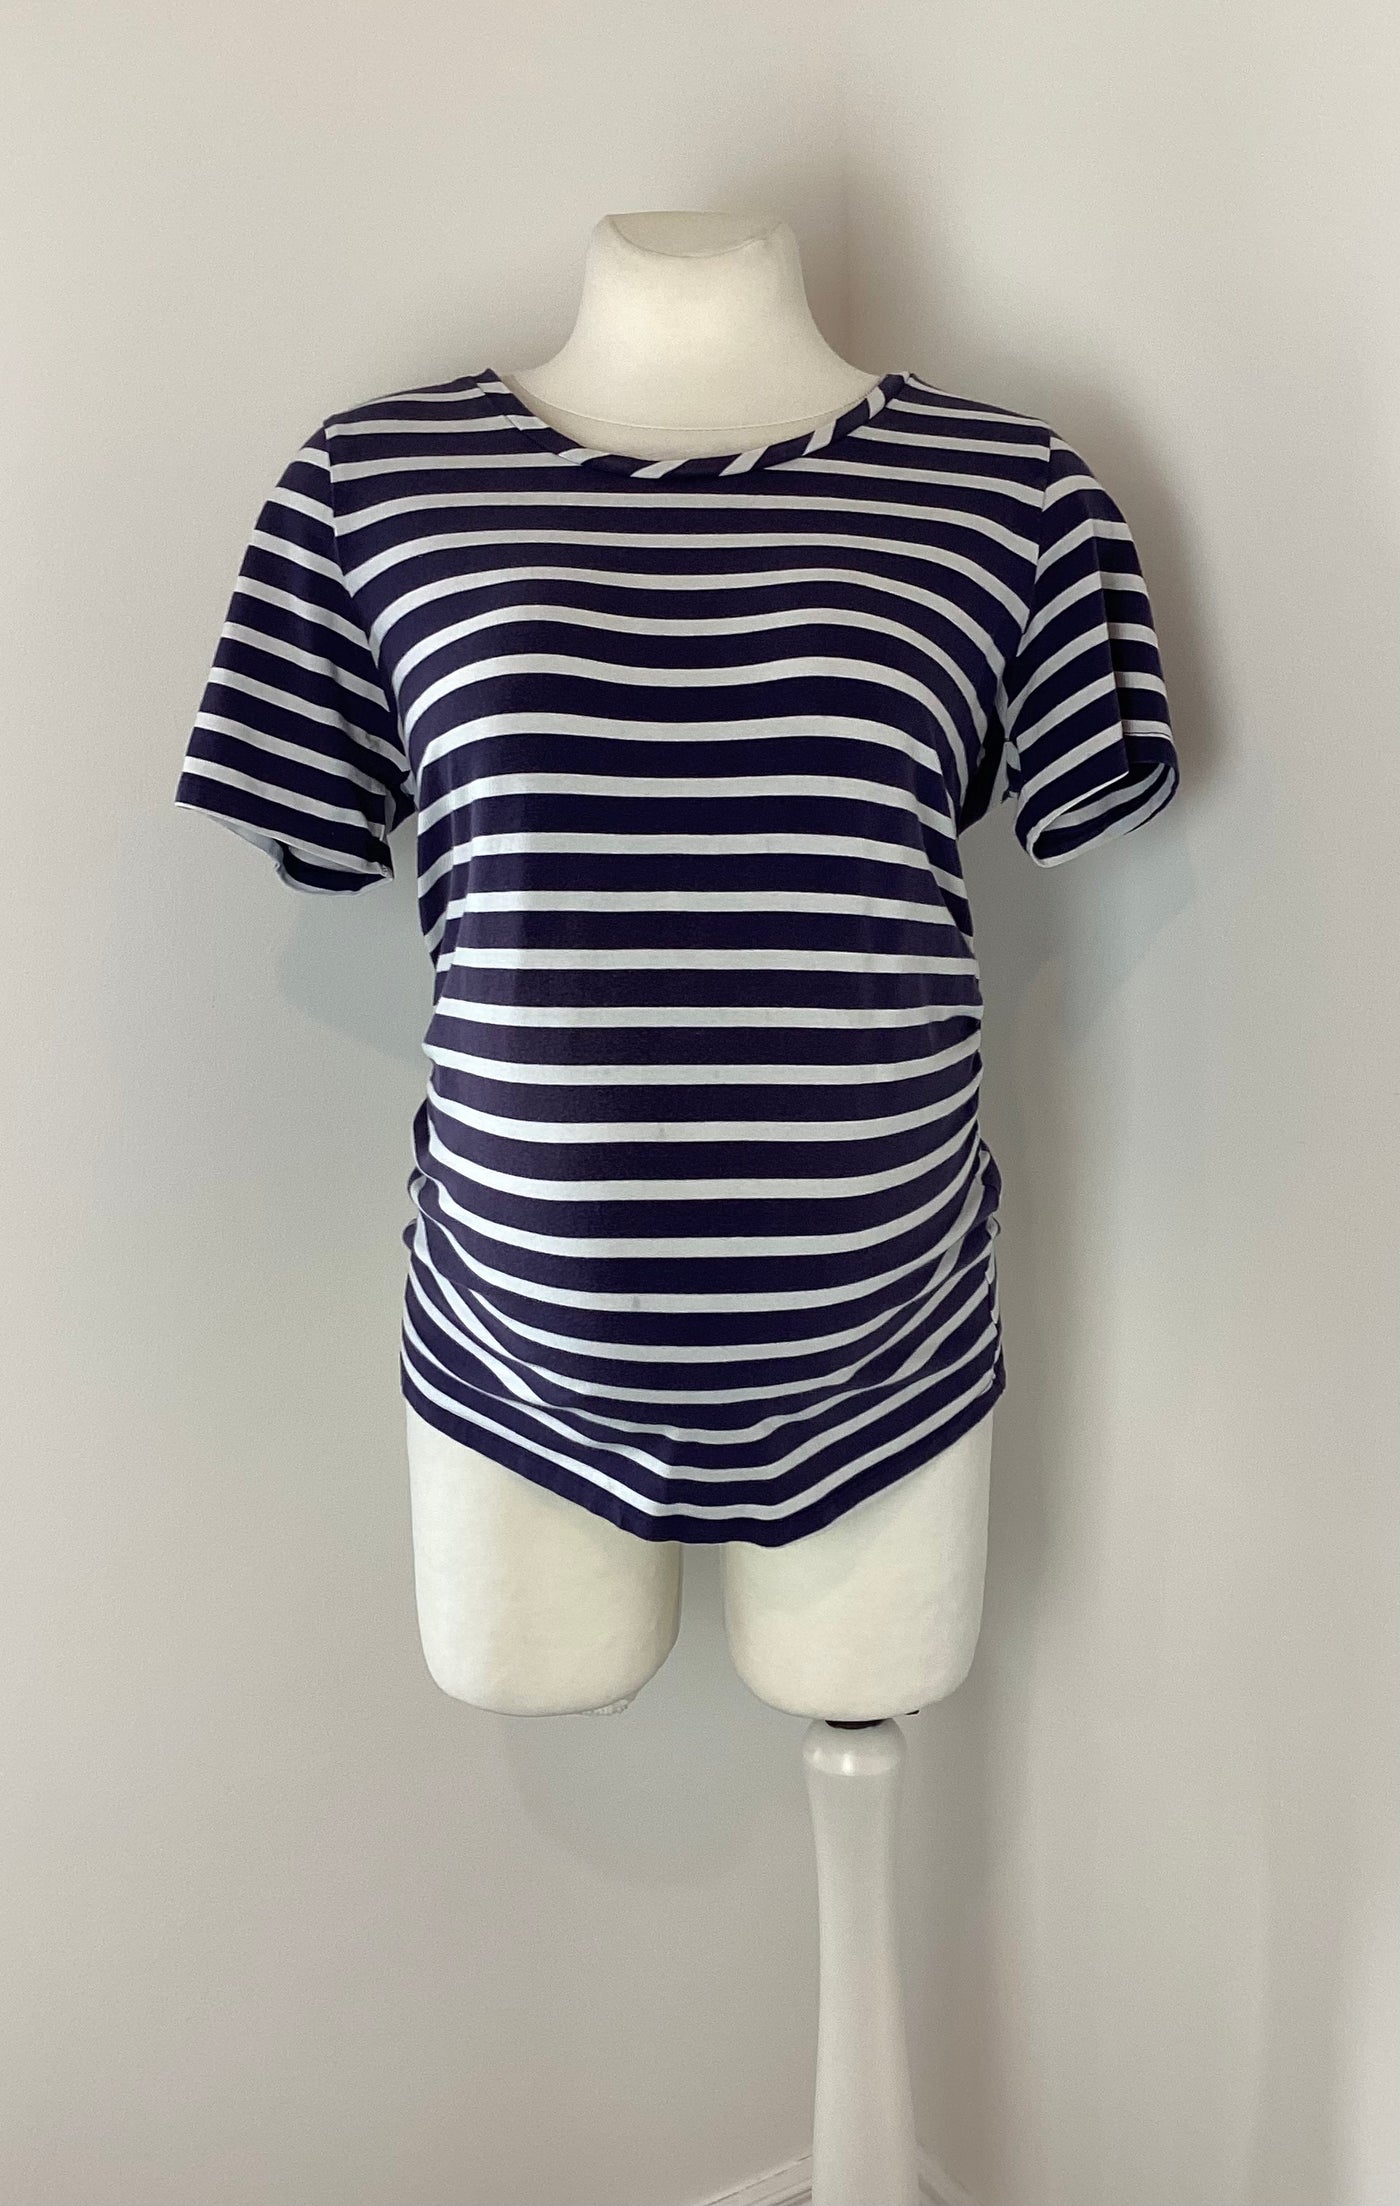 George Maternity navy & white striped t-shirt - Size 18 (more like size 16)